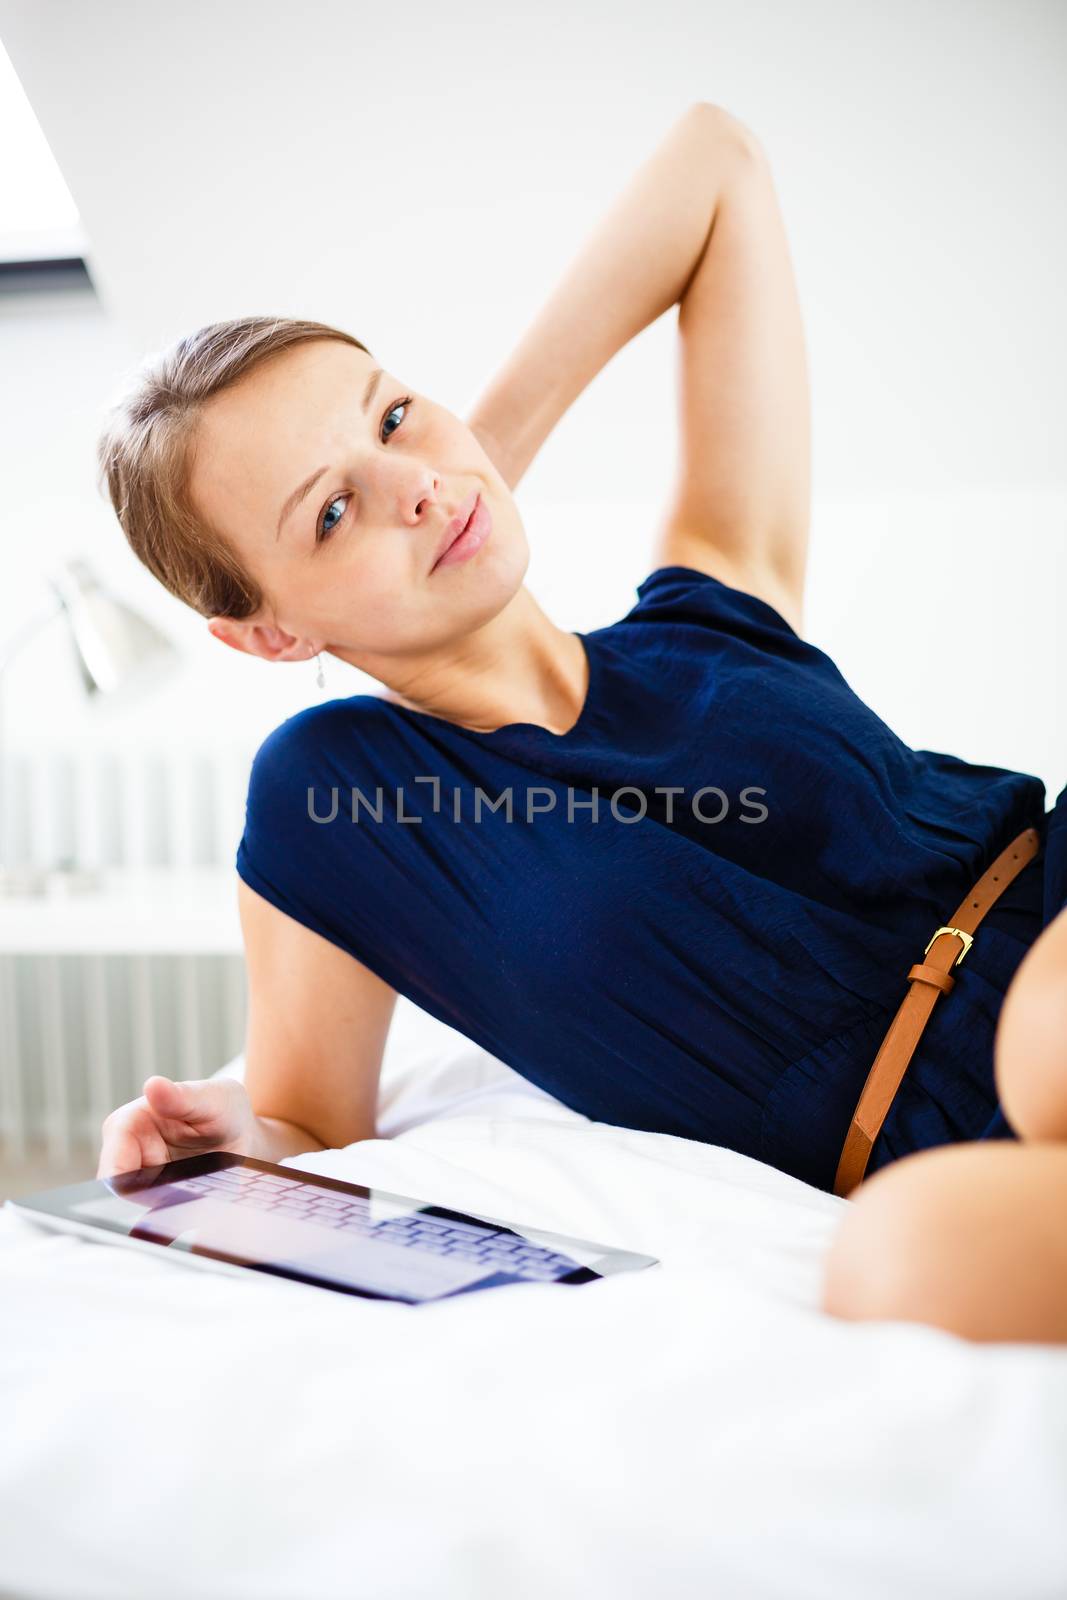 Pretty, young woman using her tablet computer in bed by viktor_cap